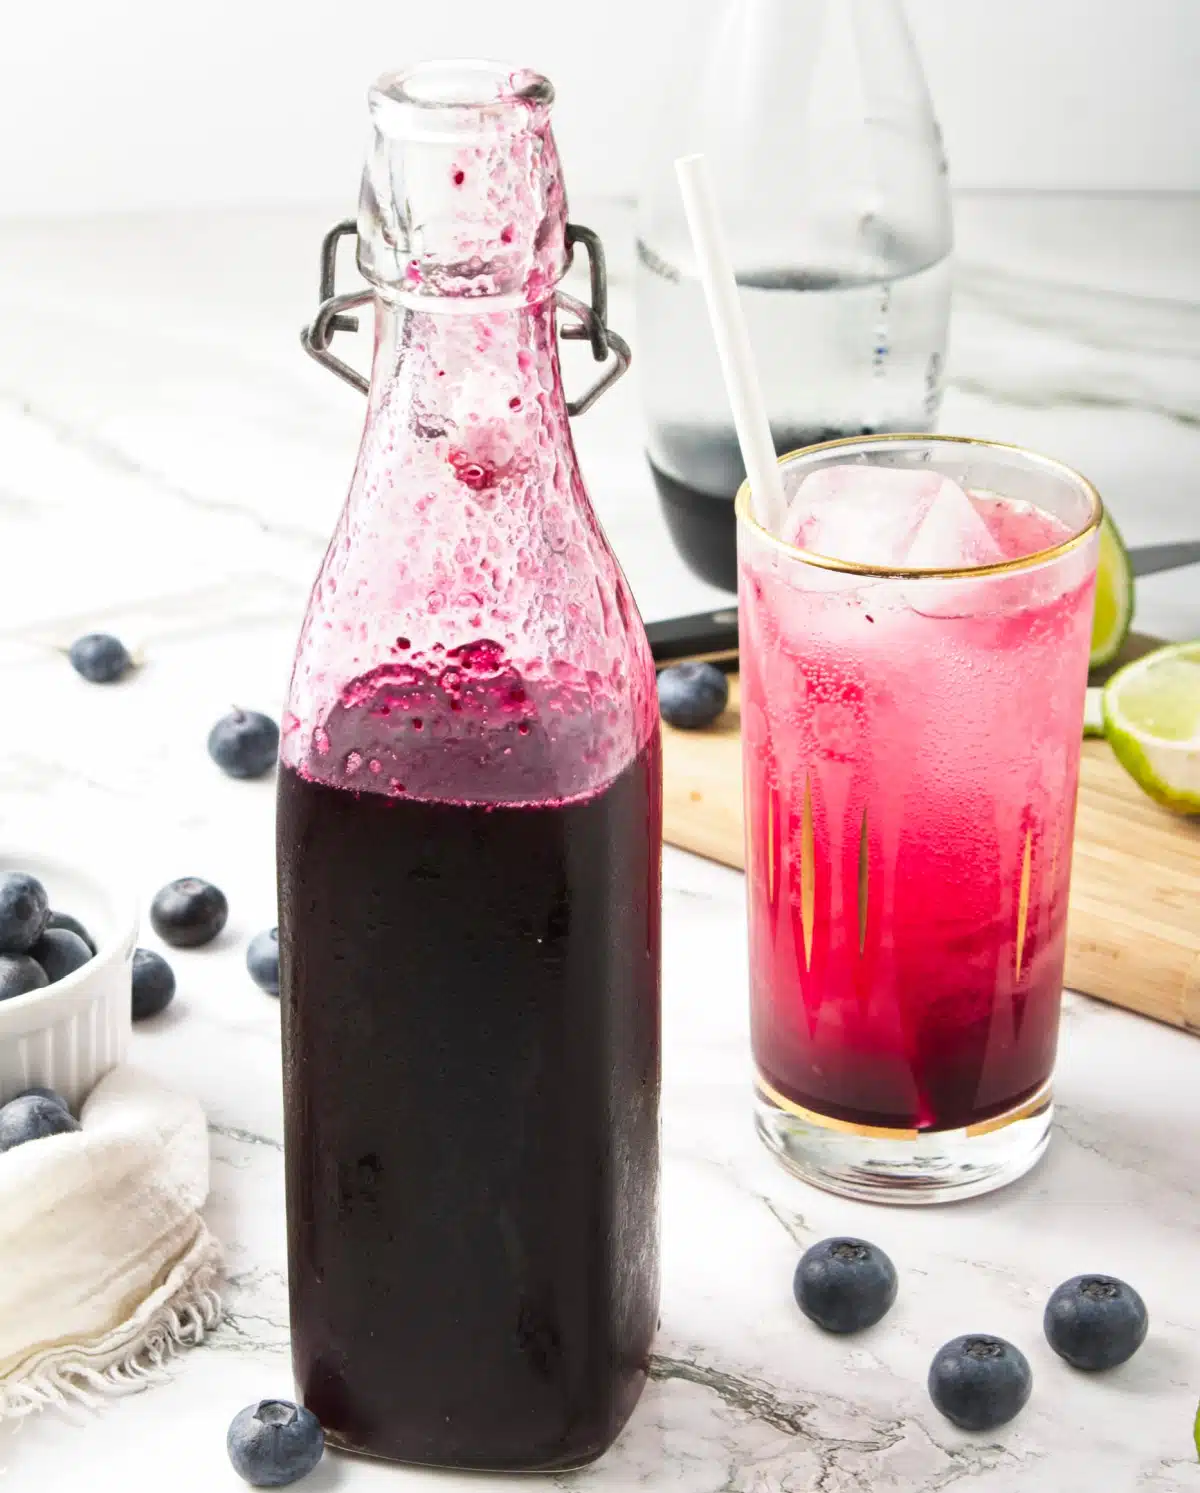 blueberry syrup in a bottle wwith glass and fresh blueberries